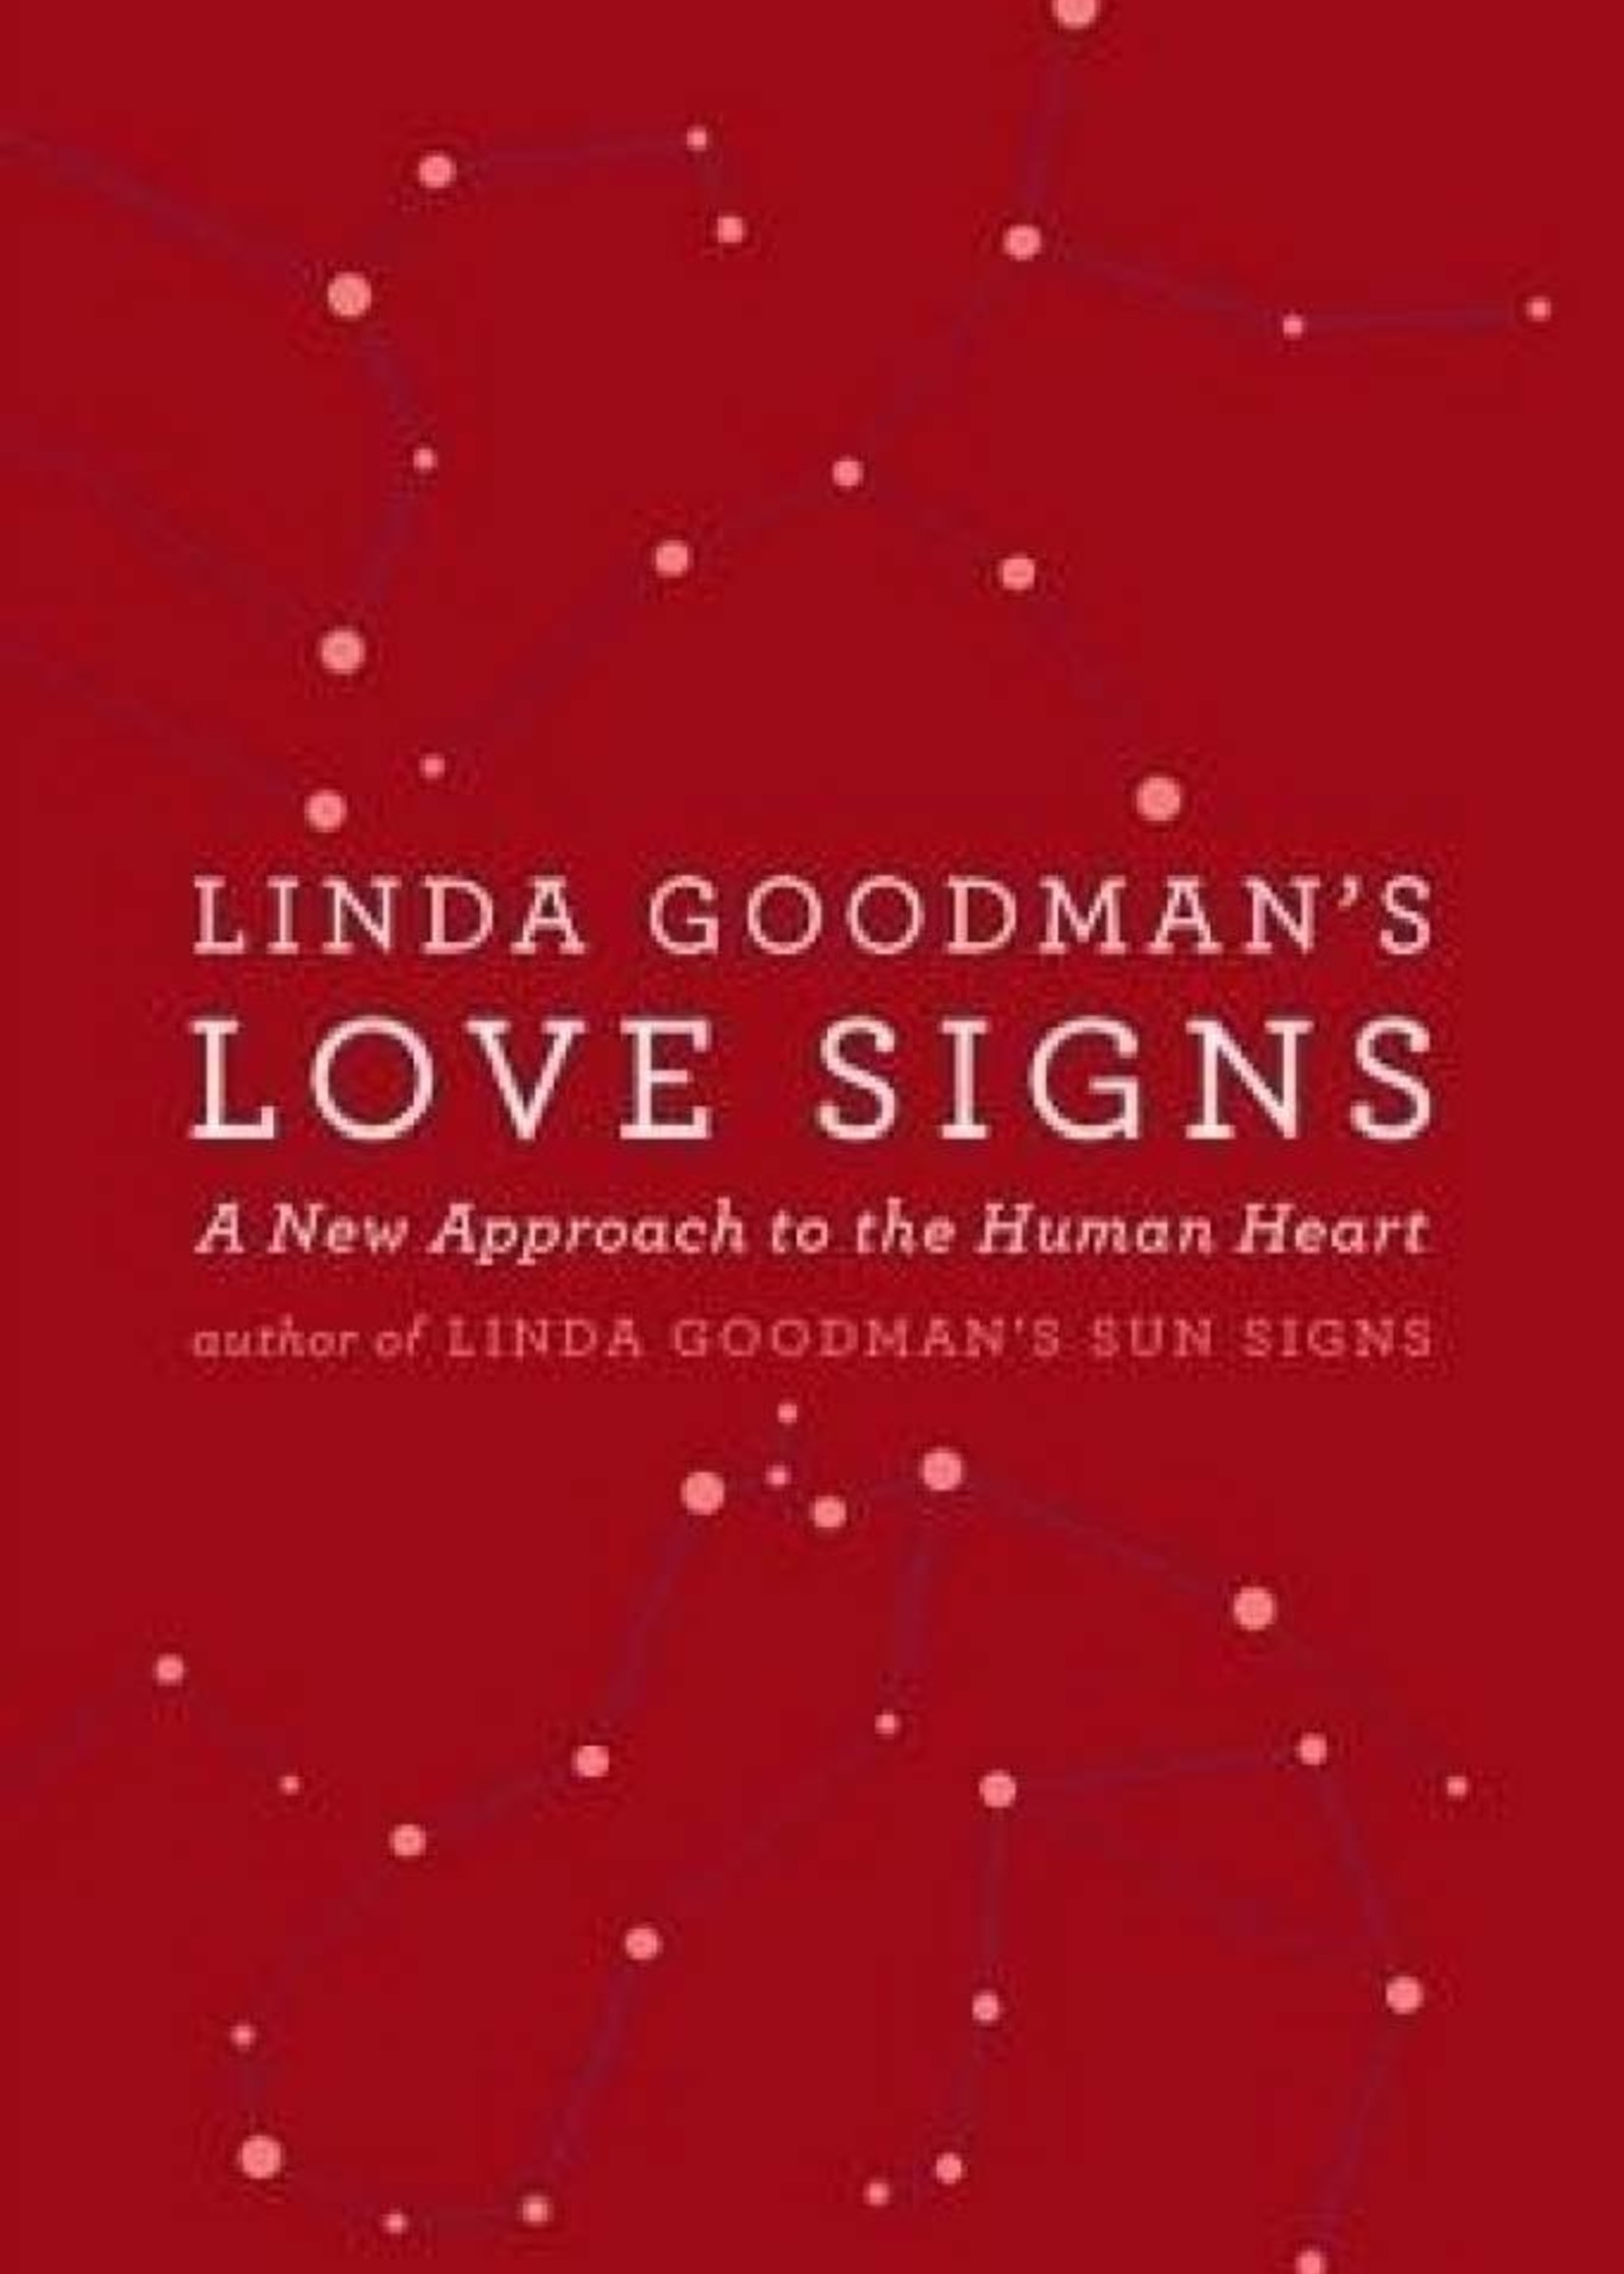 Linda Goodman's Love Signs | A New Approach to the Human Heart